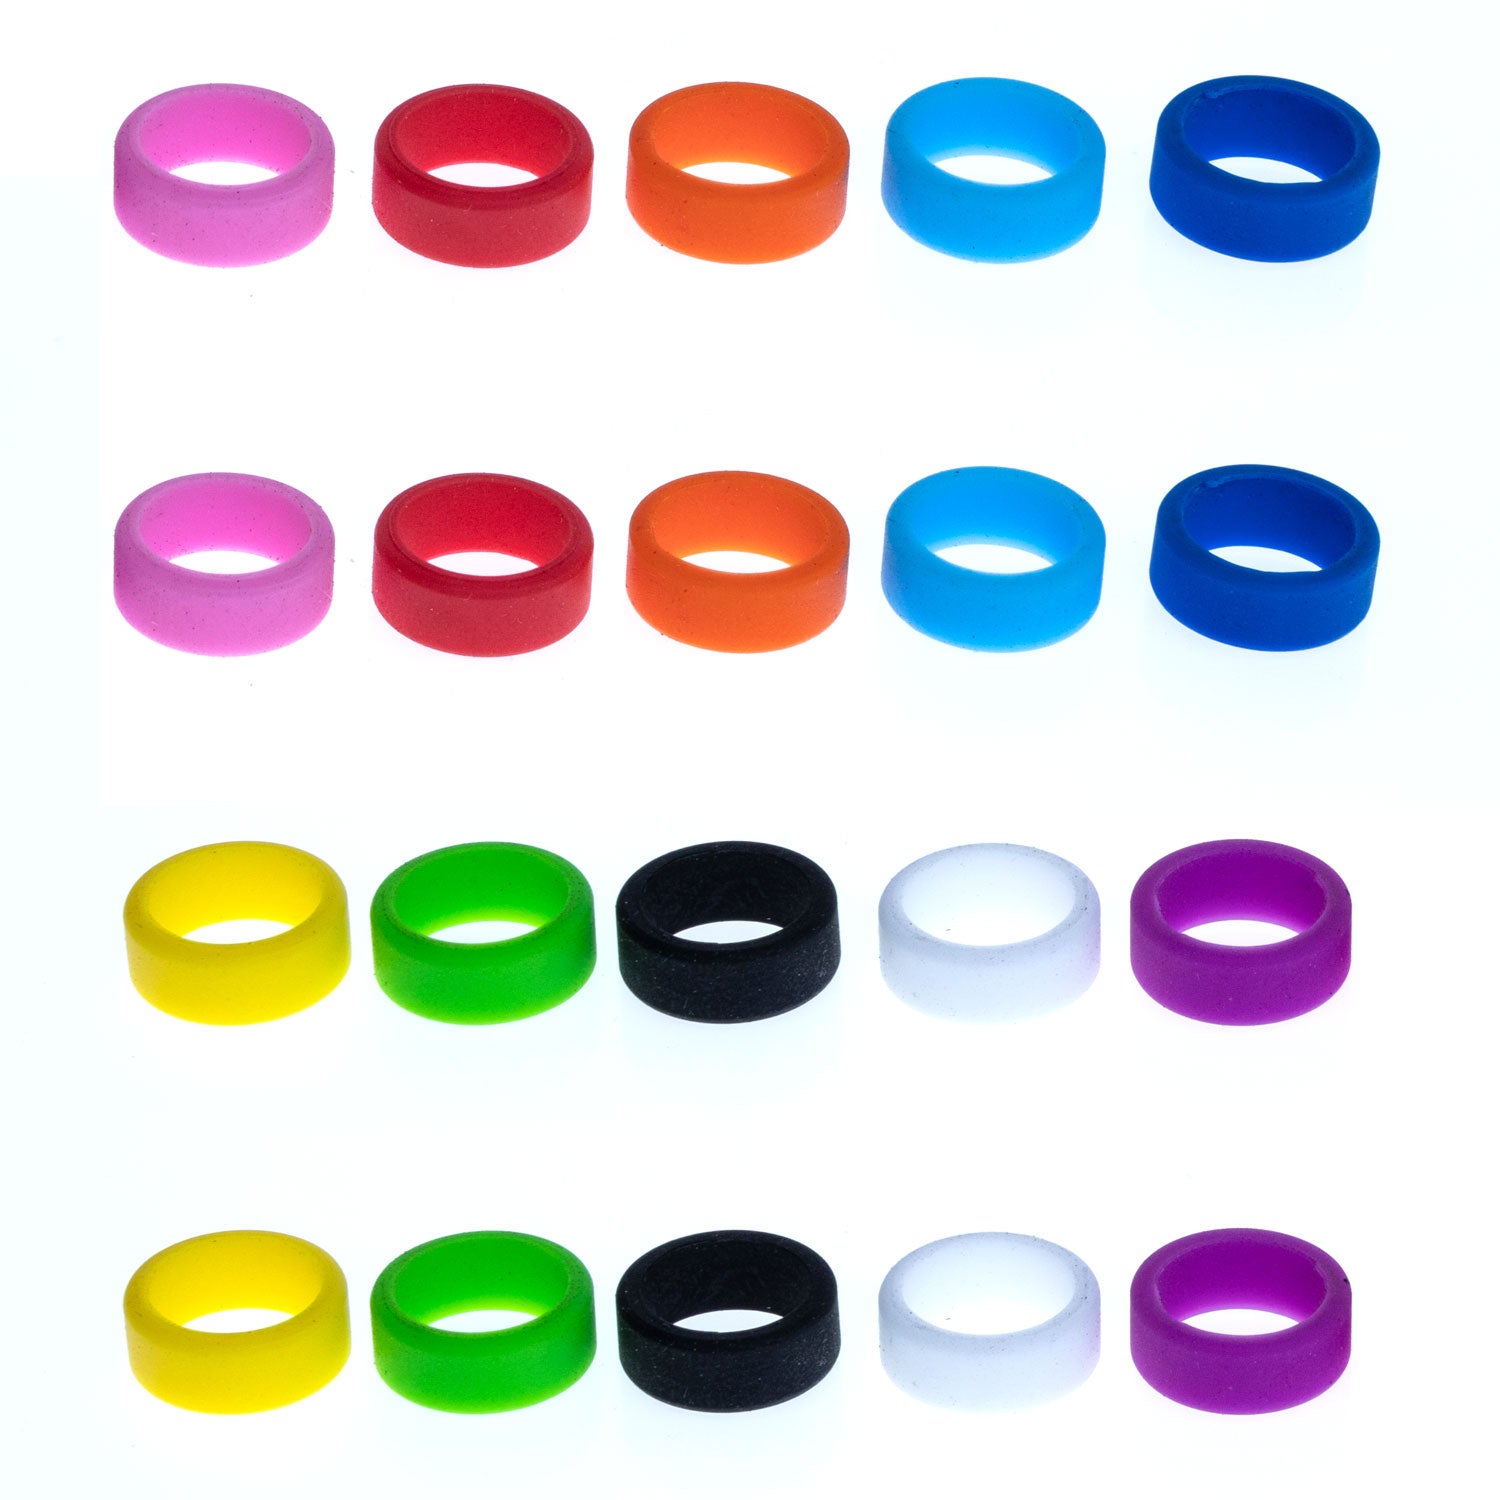 Grifiti Band Joes 0.8 x 0.25 inch Small Elastic Silicone Rubber Bands Rings Gasket Food Cooking Durable Office Boxes Wraps 20 Pack Assorted Colorful